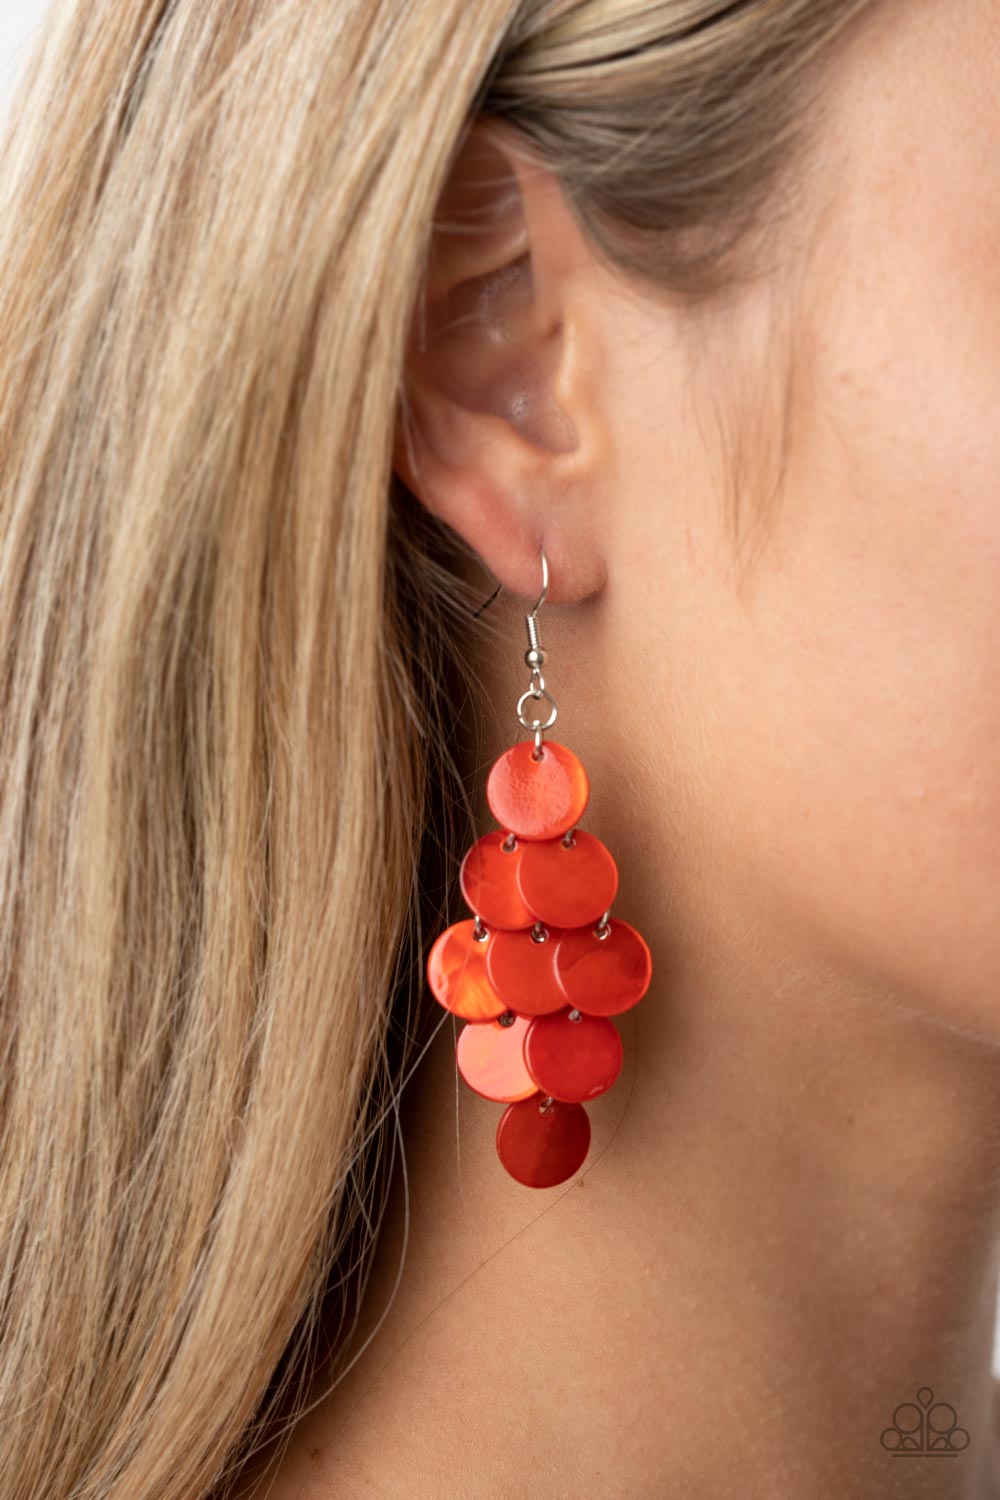 Tropical Tryst Orange Earrings Paparazzi Accessories. #P5SE-OGXX-177XX. Subscribe & Save. 